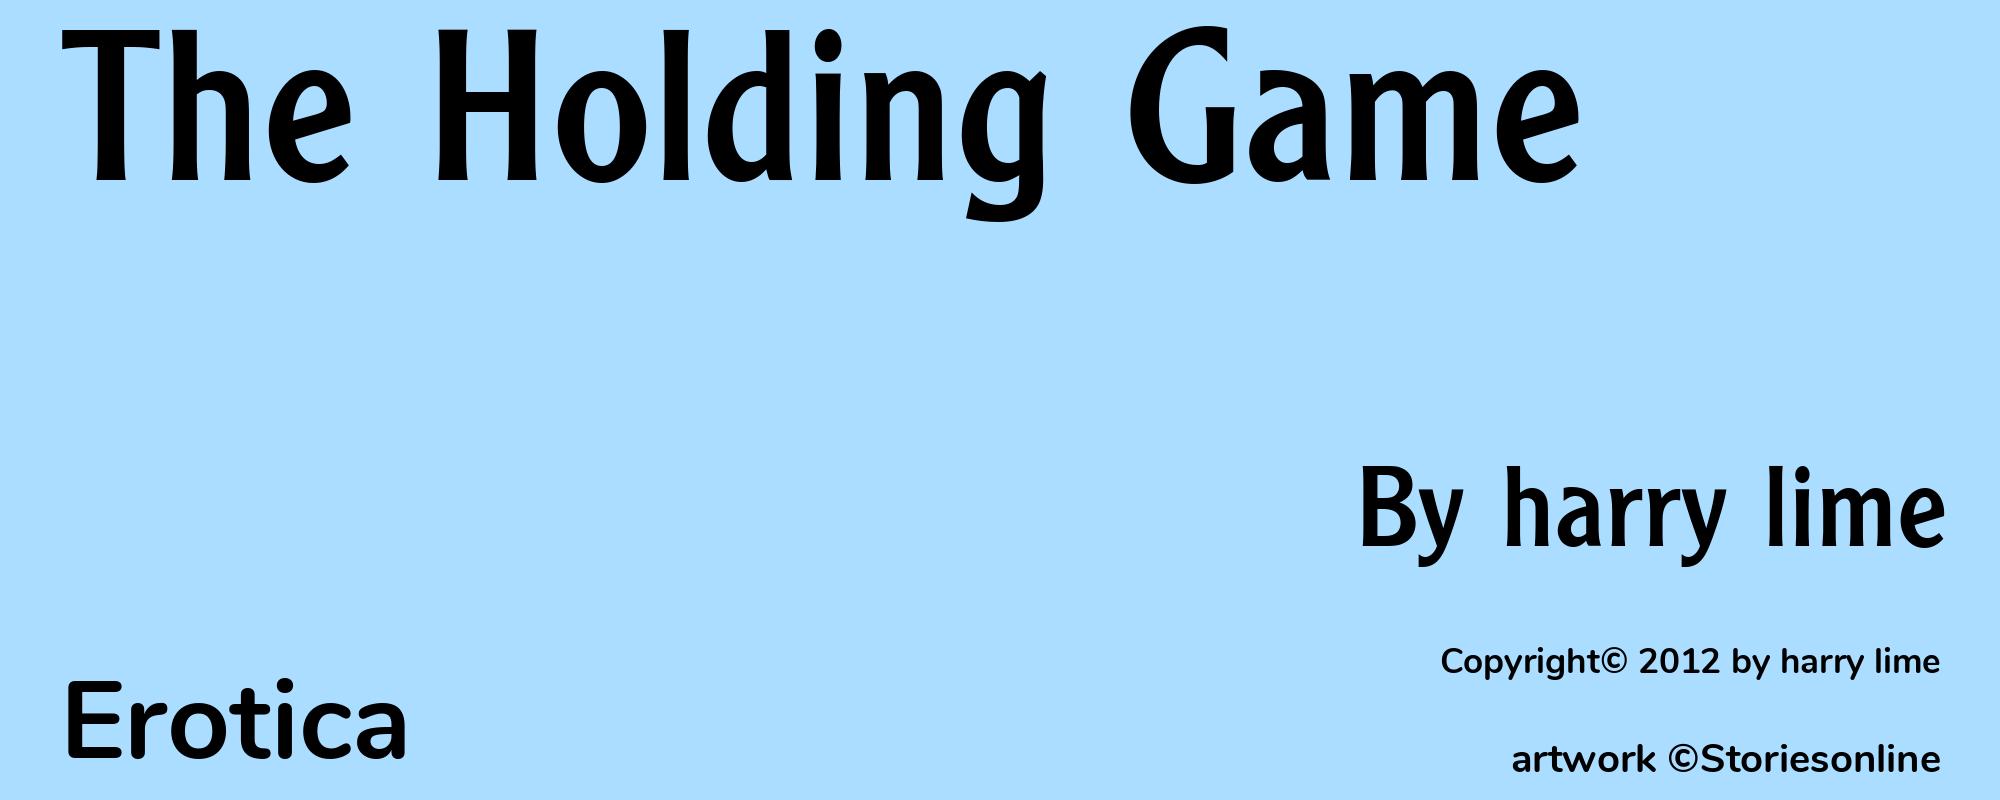 The Holding Game - Cover